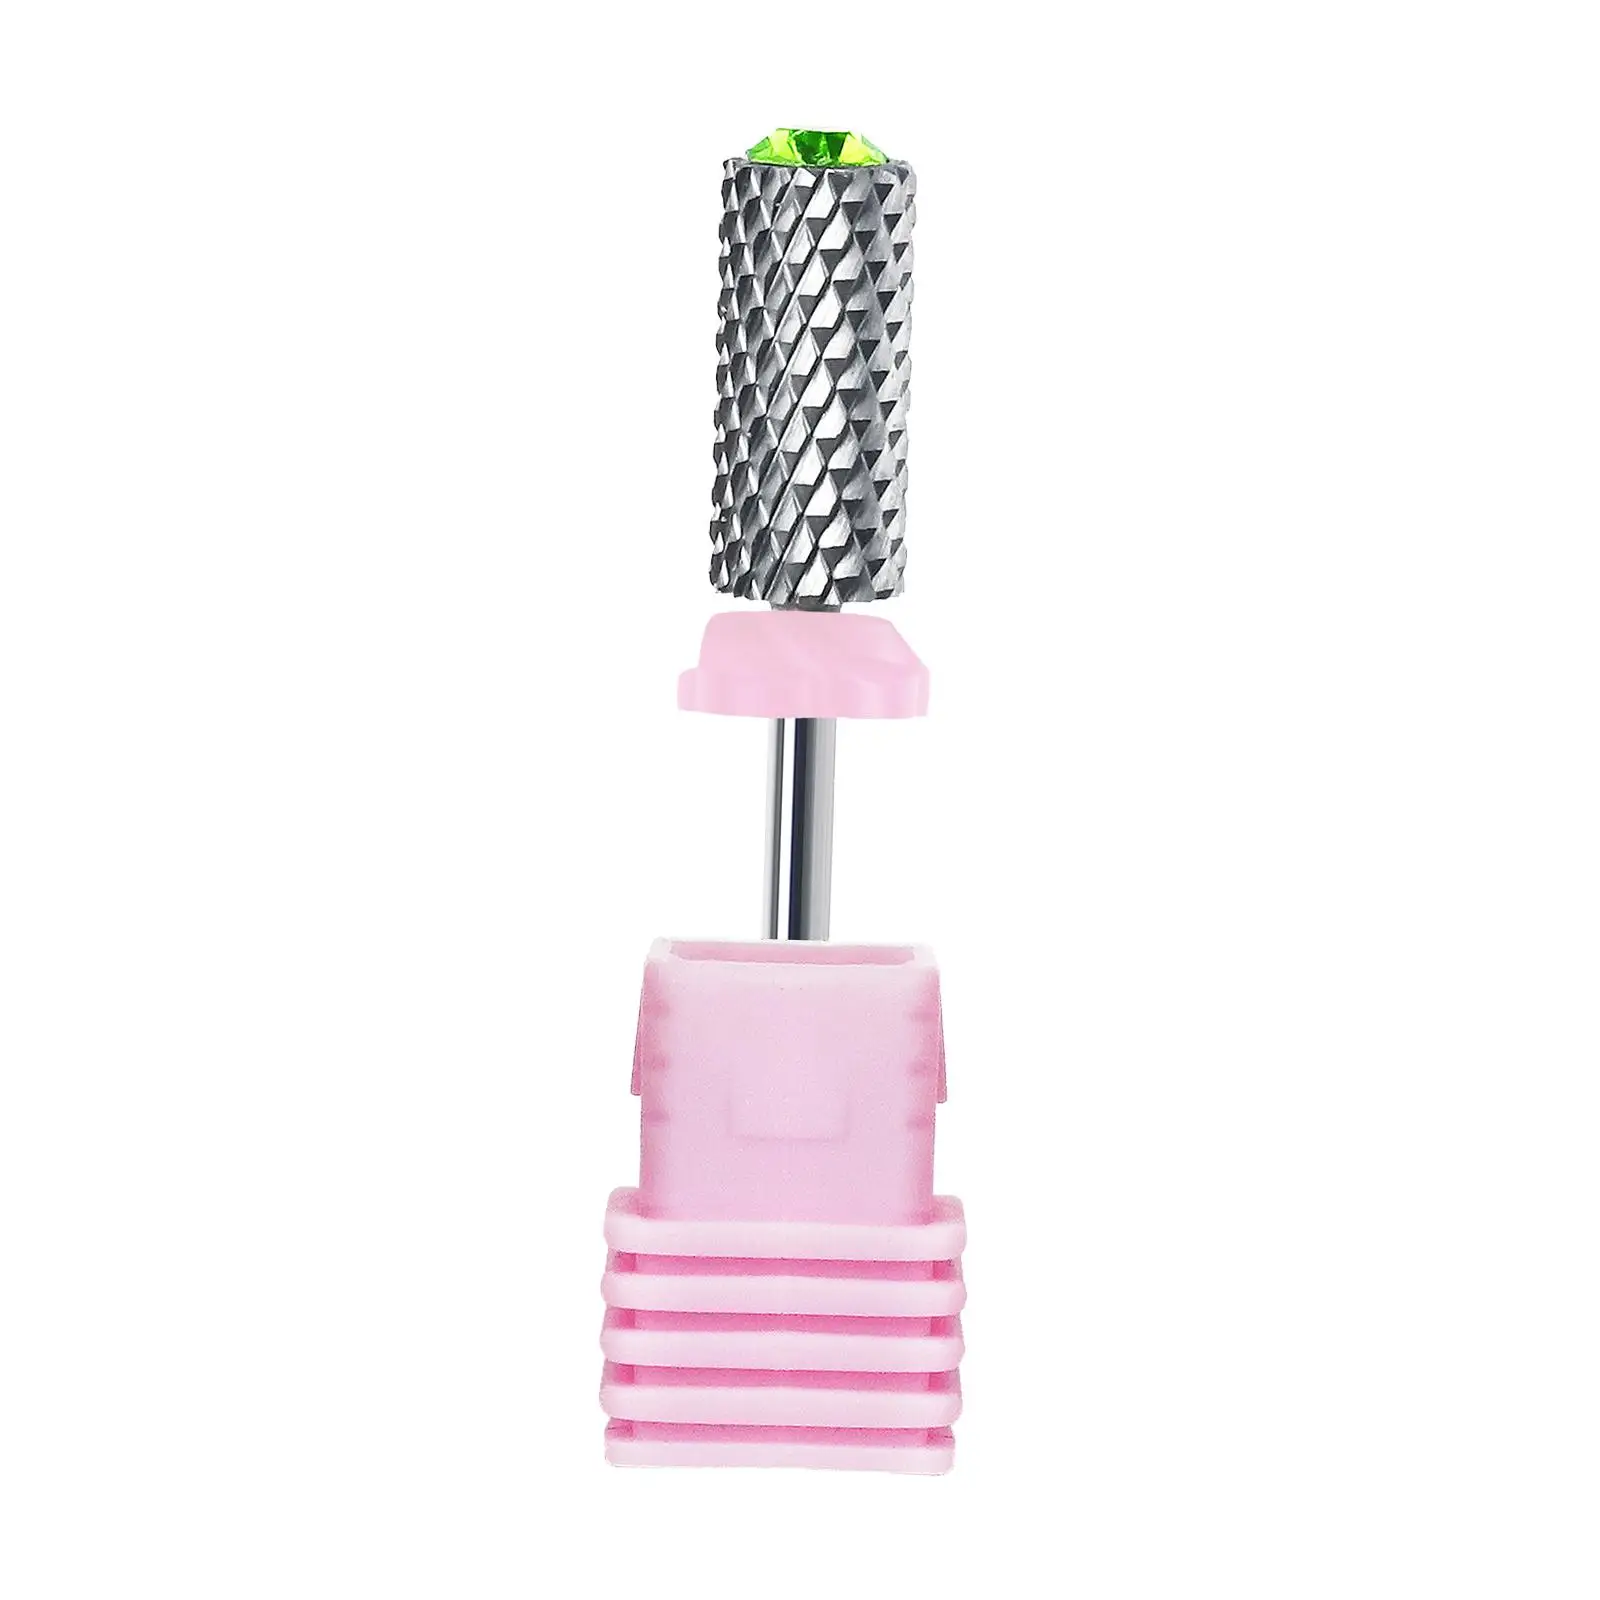 Nail Drill Bit Accessories Electric Nail File Bit Manicure Pedicure Tool Rotary Burrs Cuticle Remover Bit for Acrylic Gel Nails